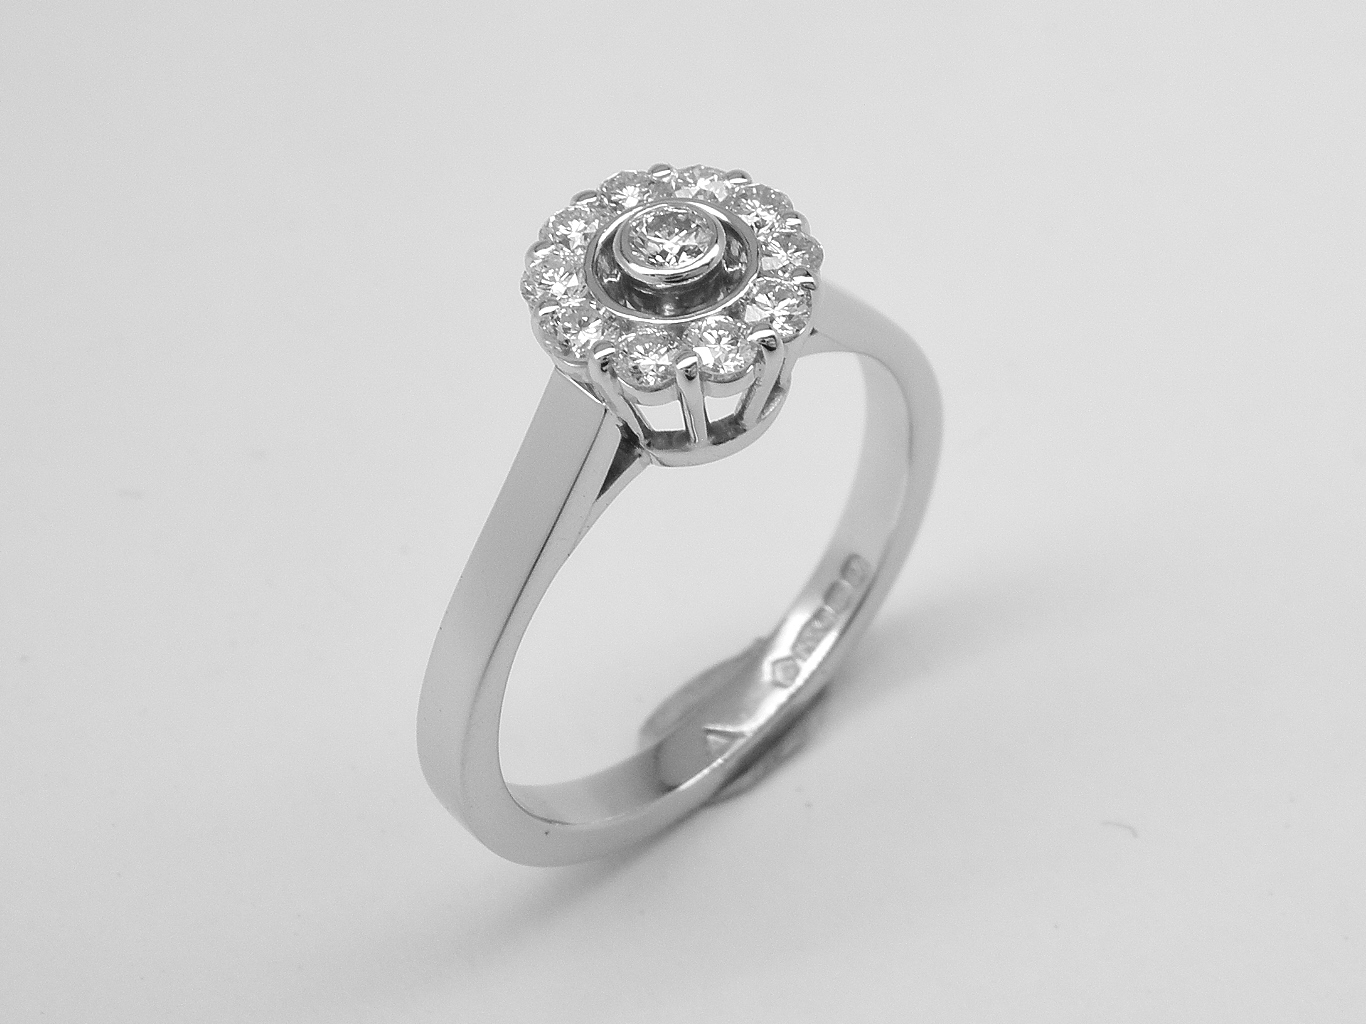 An 11 stone round brilliant cut diamond 'Halo' style cluster ring mounted in platinum.